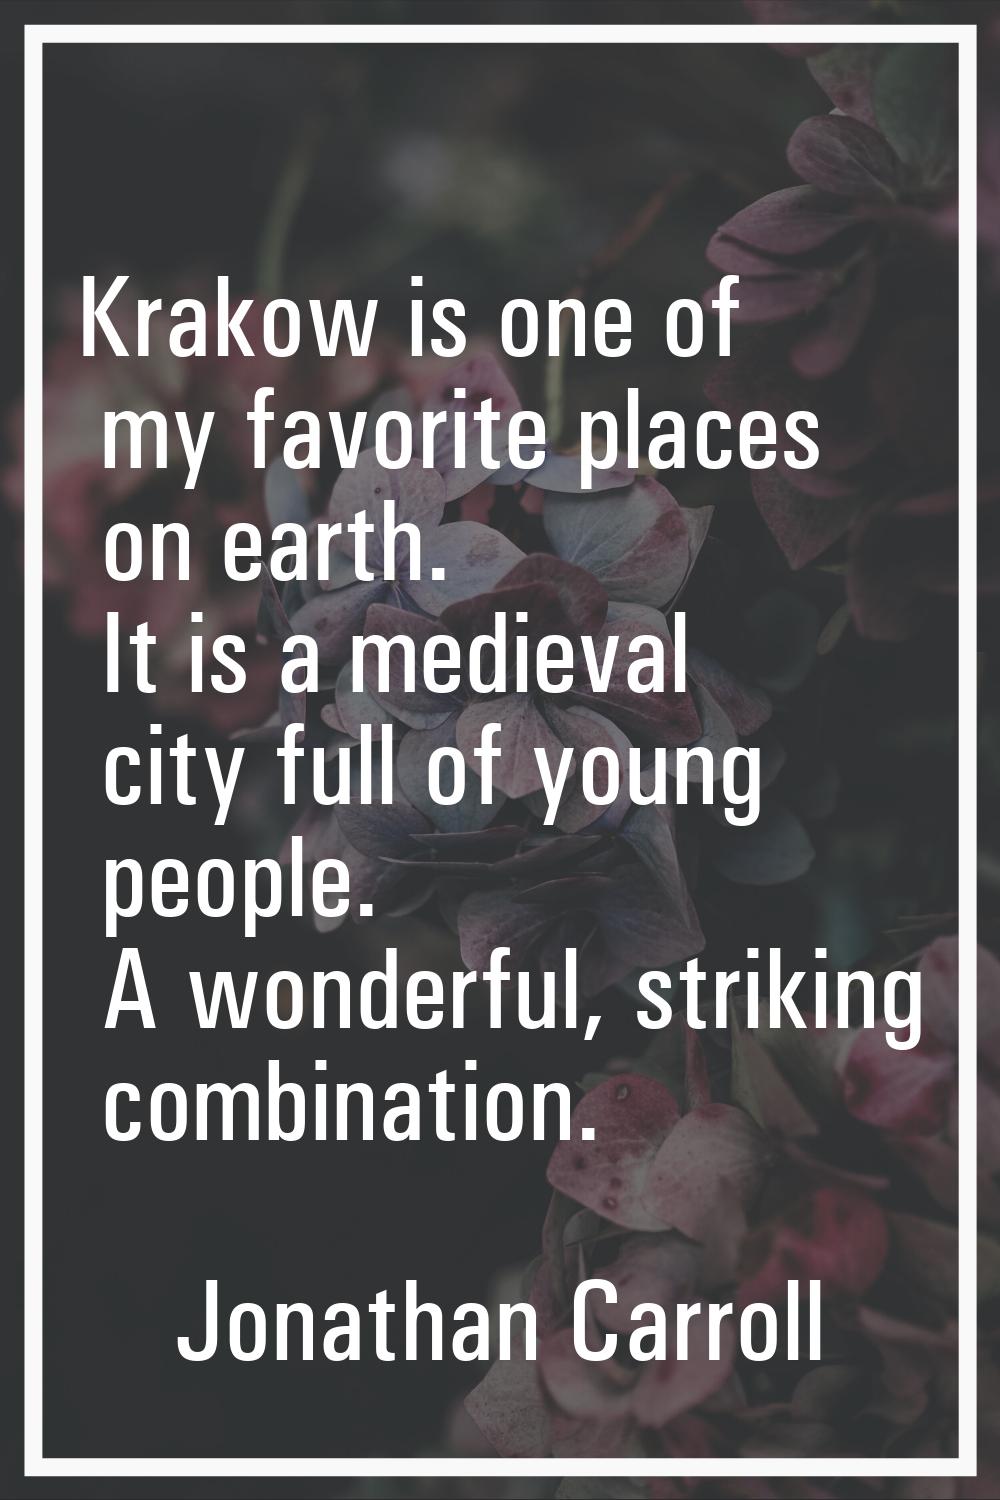 Krakow is one of my favorite places on earth. It is a medieval city full of young people. A wonderf